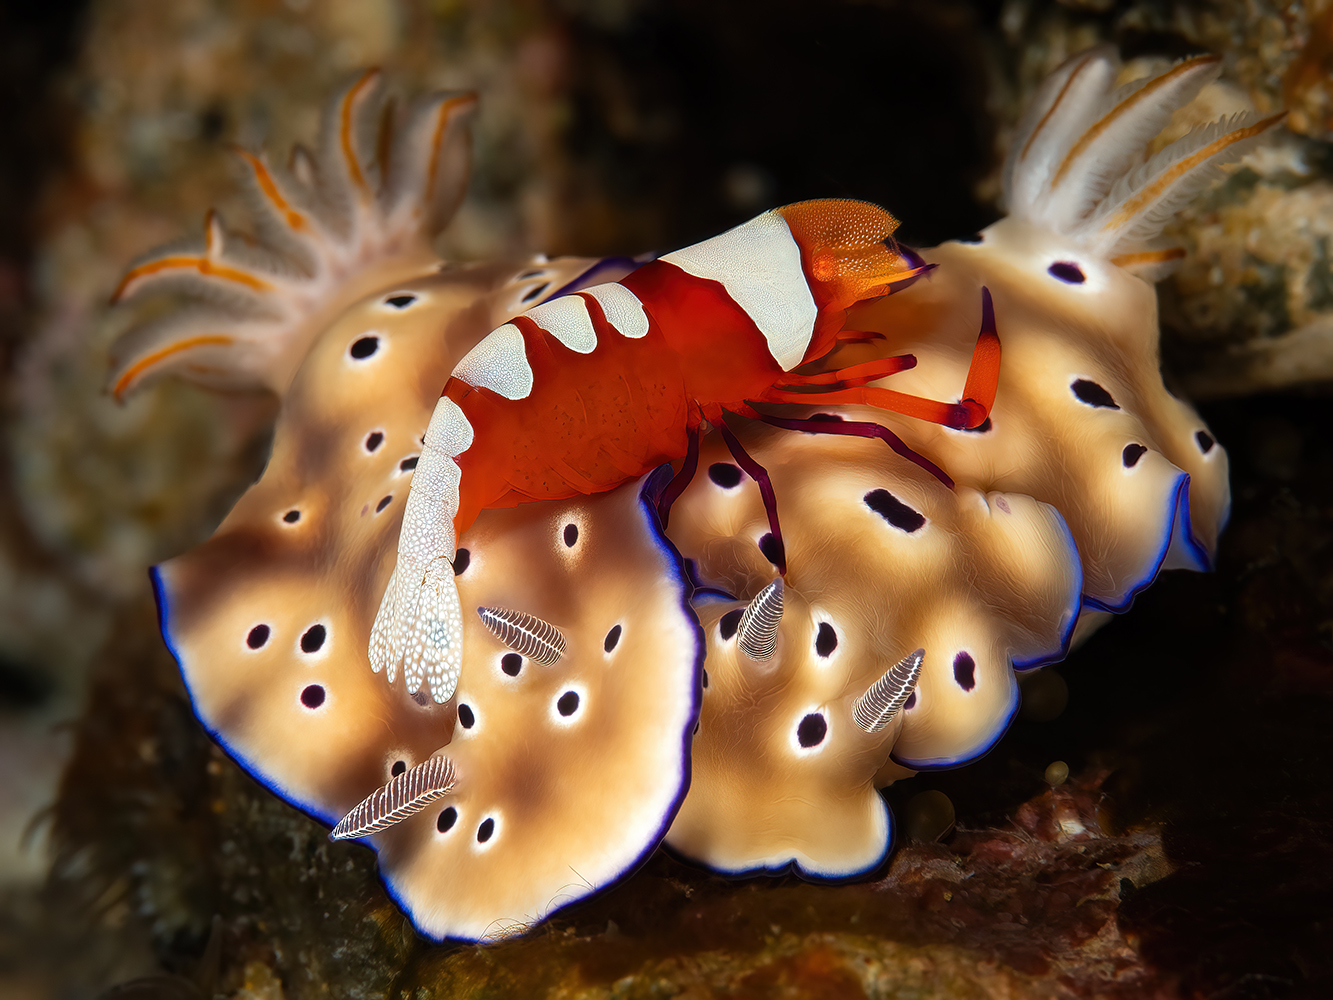 Emperor shrimp on two nudibranches.